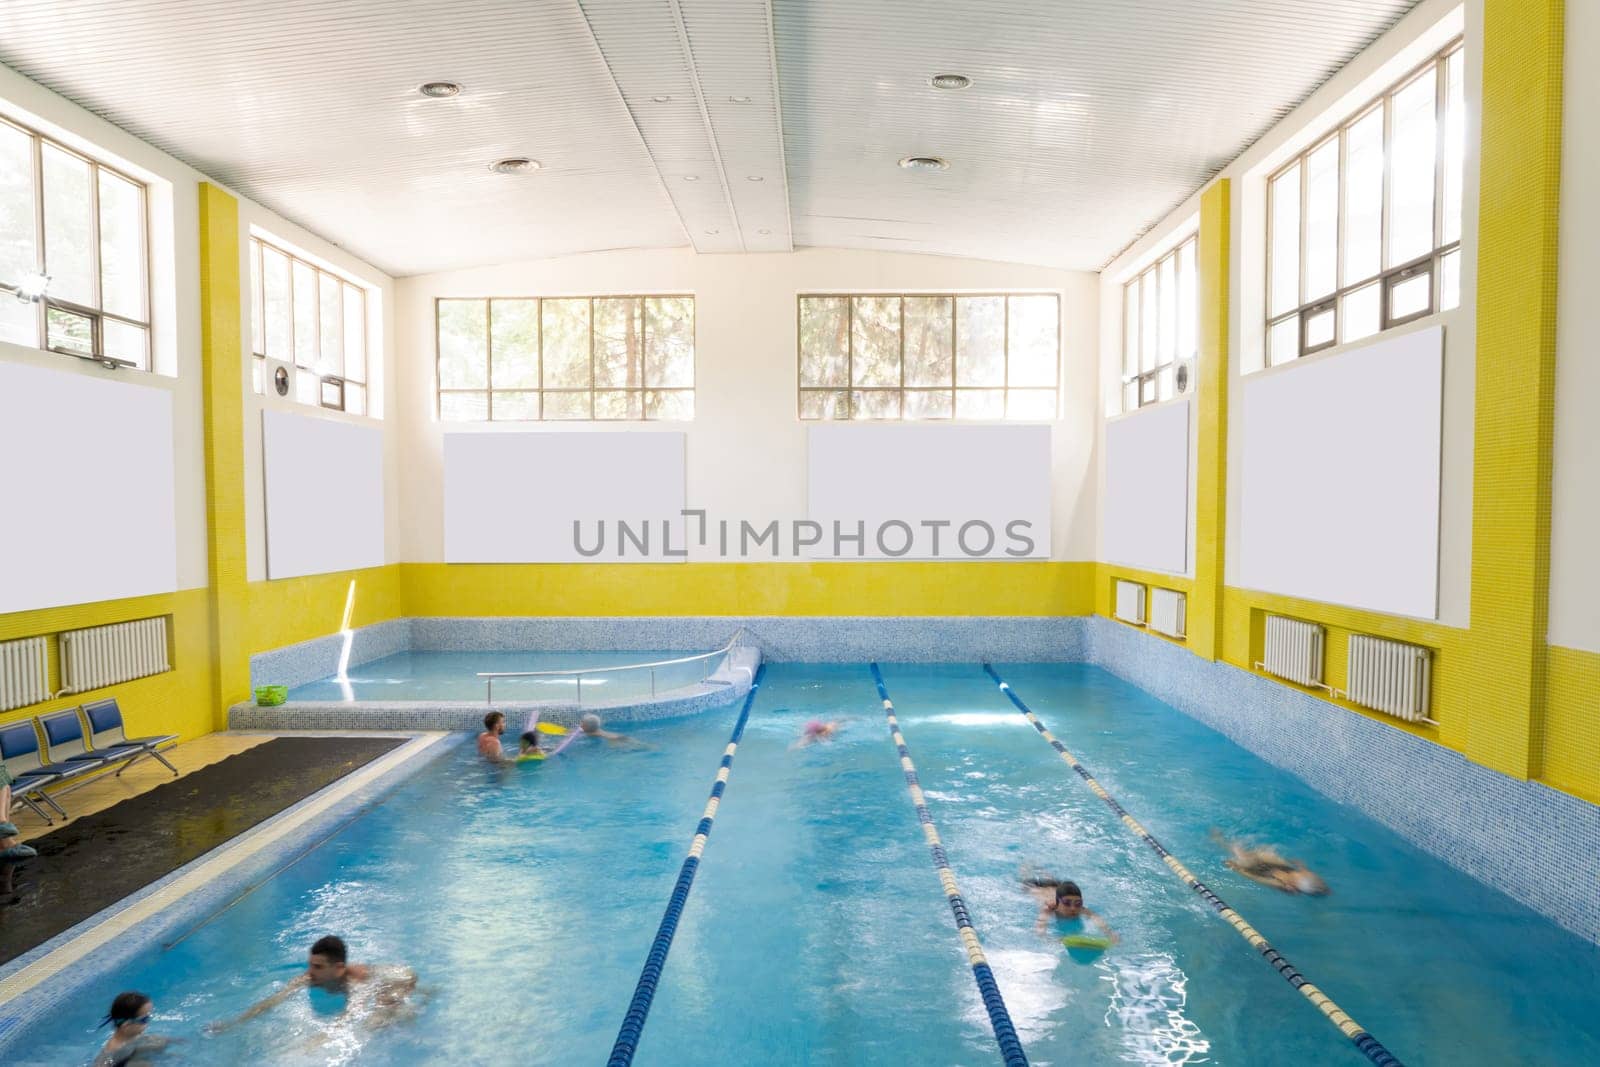 A swimming pool sectioned into 4 rows inside a a sports wellness center by A_Karim